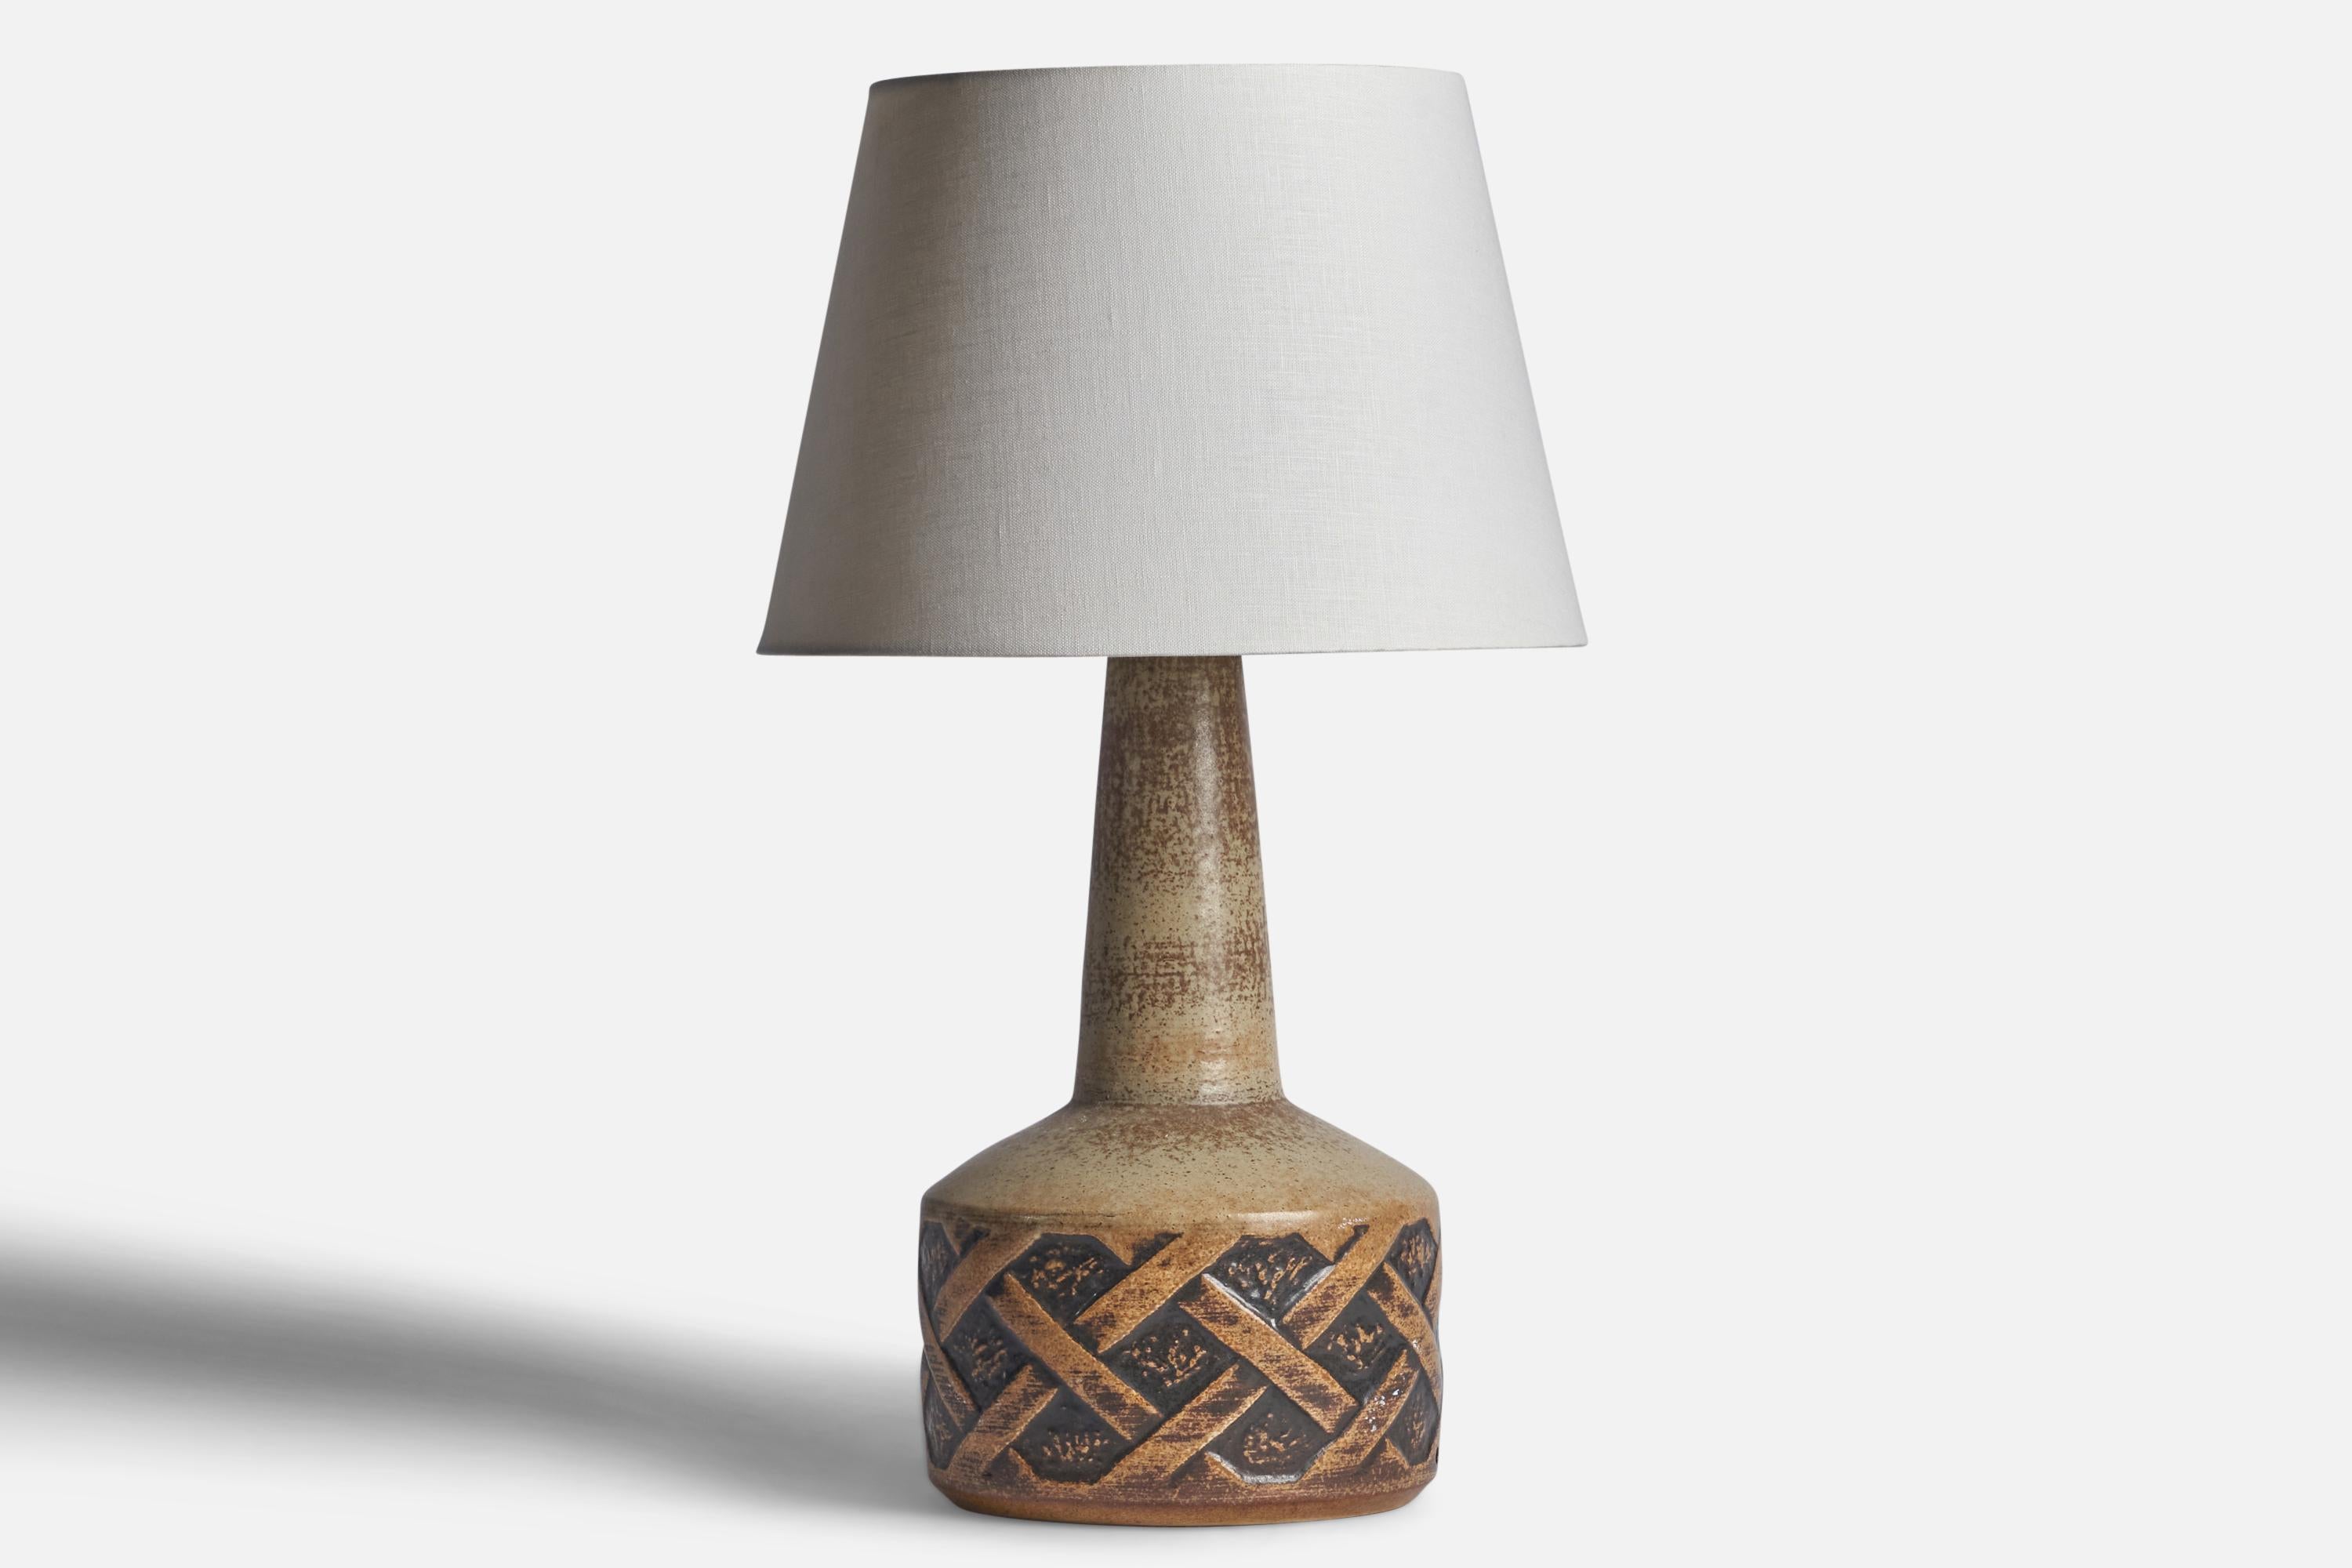 A sizeable brown grey and black-glazed stoneware table lamp designed and produced by Søholm, Denmark, 1960s.

Dimensions of Lamp (inches): 20” H x 8.75” Diameter
Dimensions of Shade (inches): 4.5” Top Diameter x 15.75” Bottom Diameter x 9”